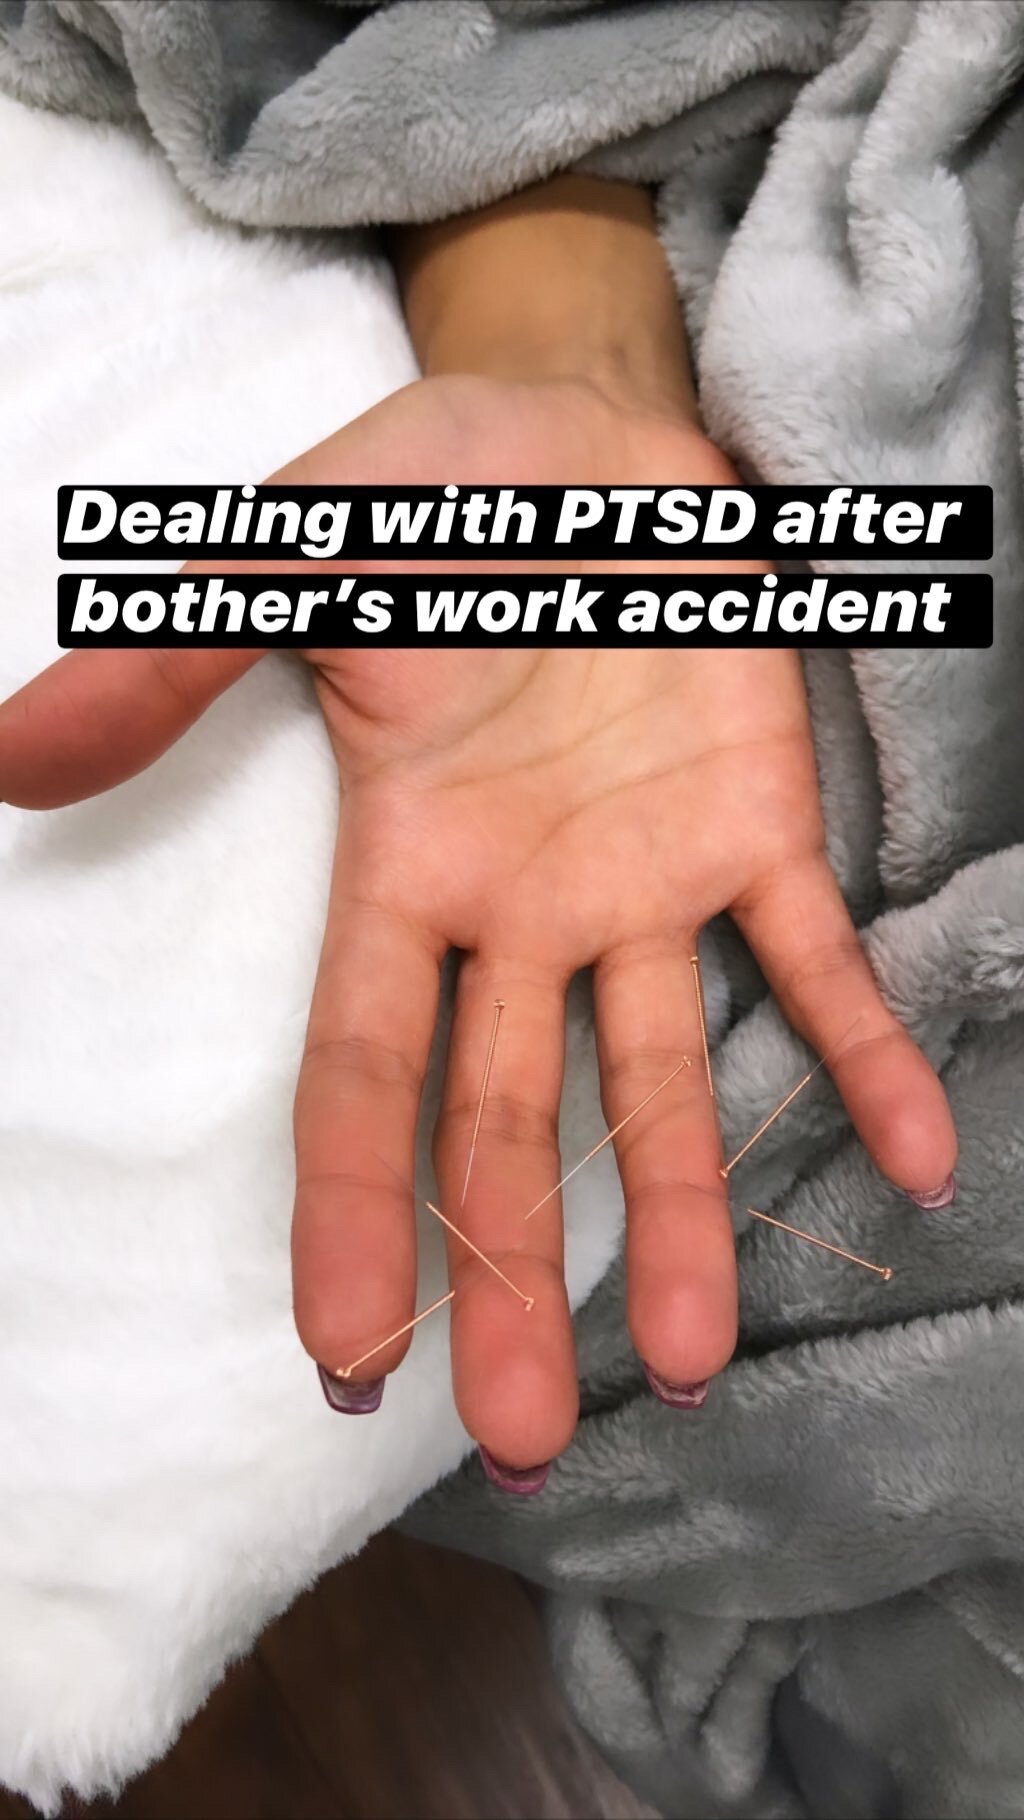  SuJok acupuncture in Vancouver used to treat mental health. Patient received treatment for Post Traumatic Stress Disorder PTSD after brother’s work accident 